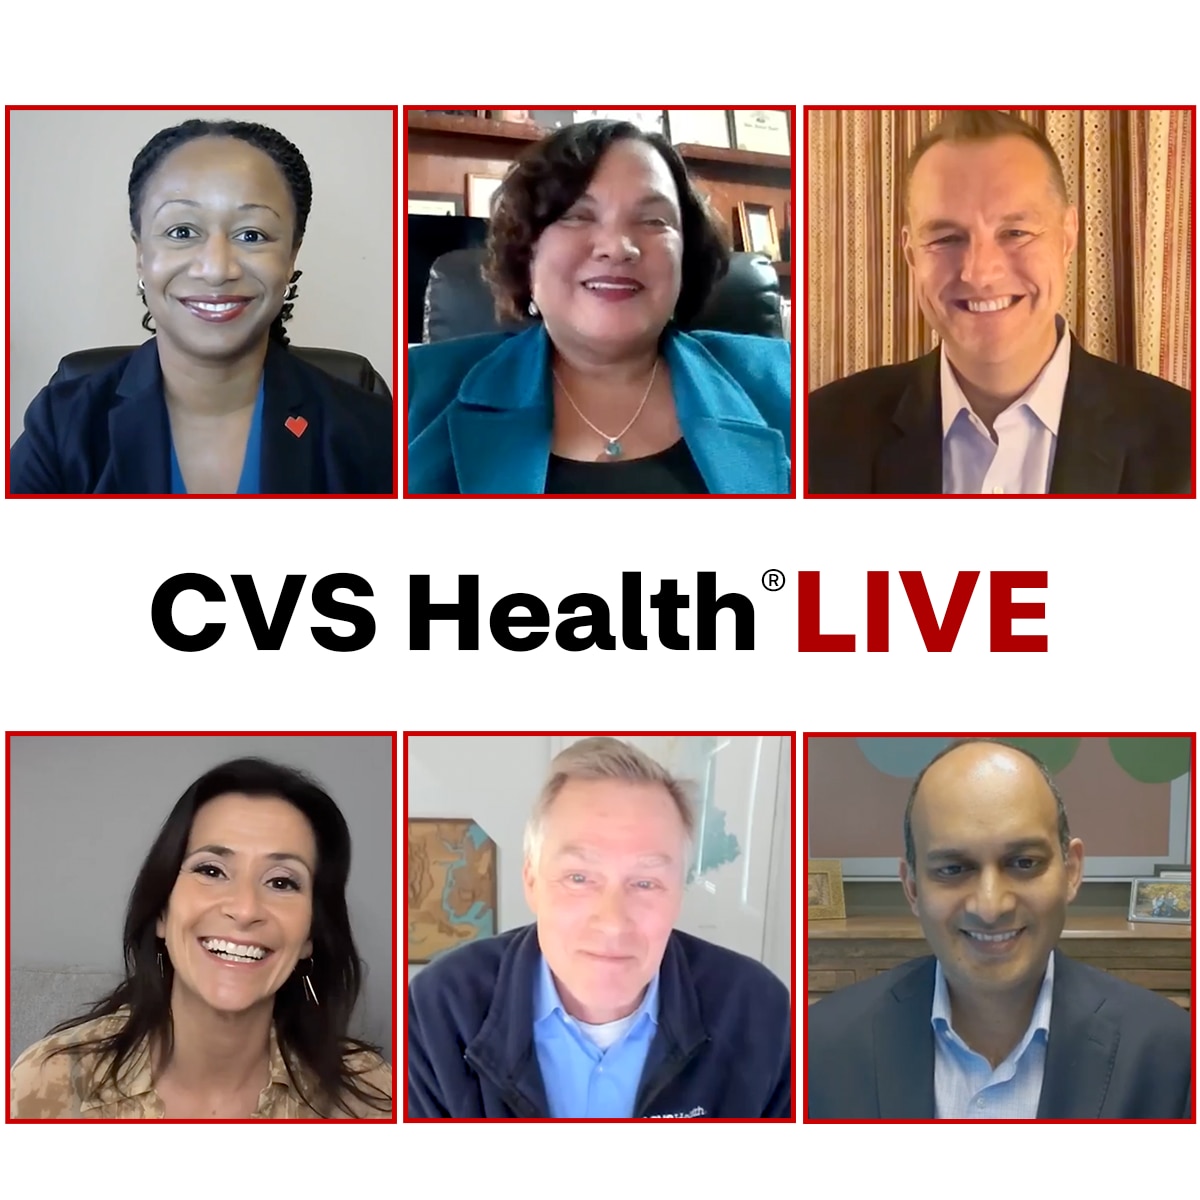 Panelists for this weeks episode of CVS Health LIve